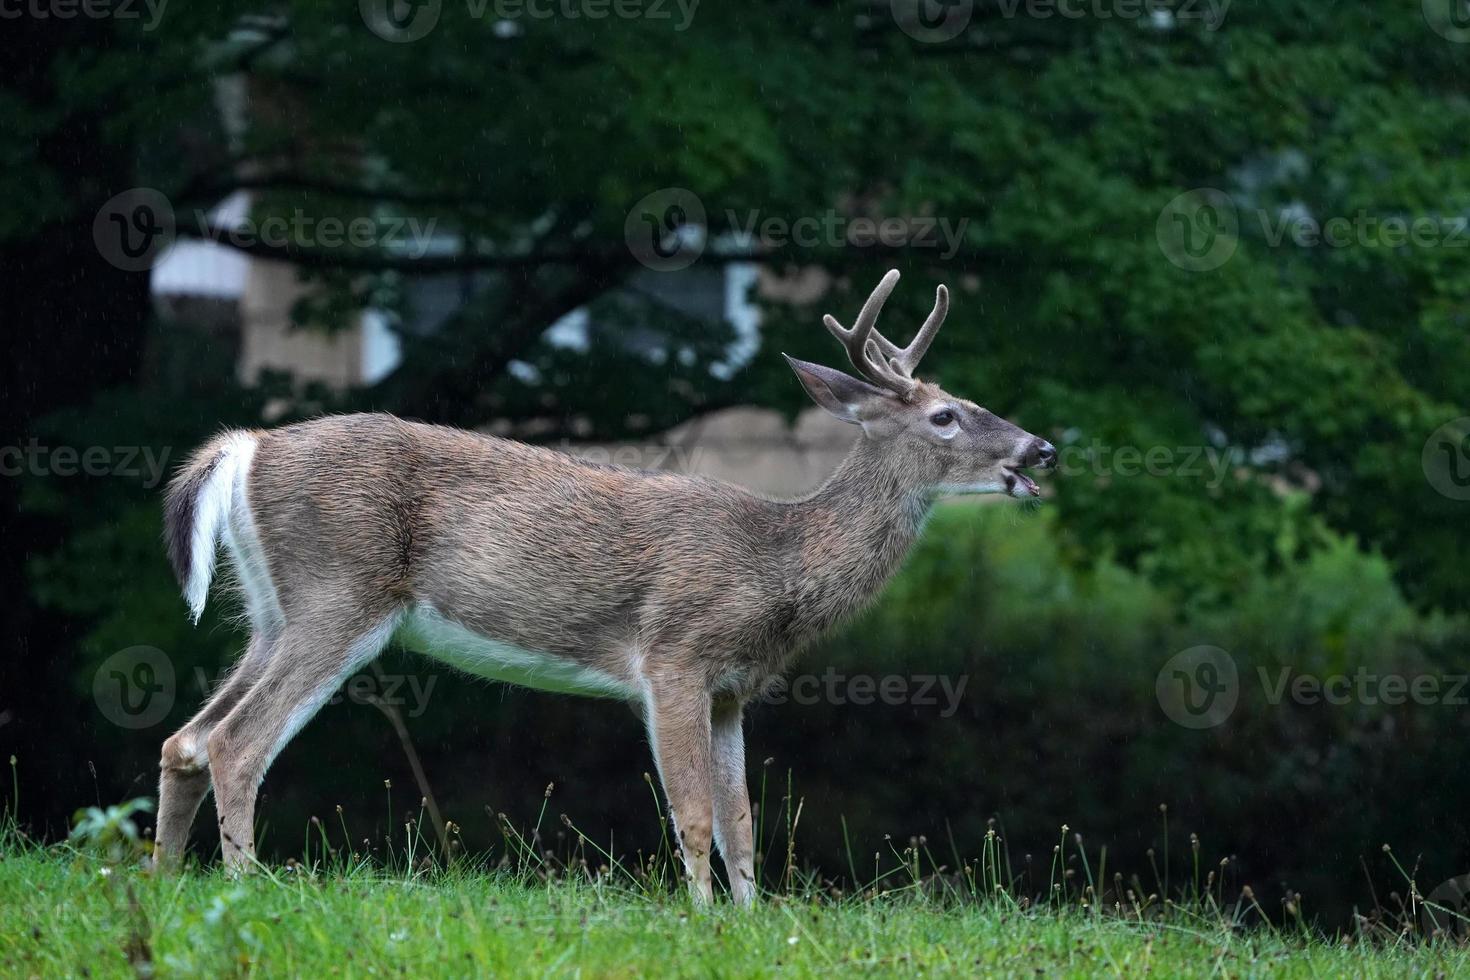 white tail deer portrait under the rain near the houses in new york state county countryside photo